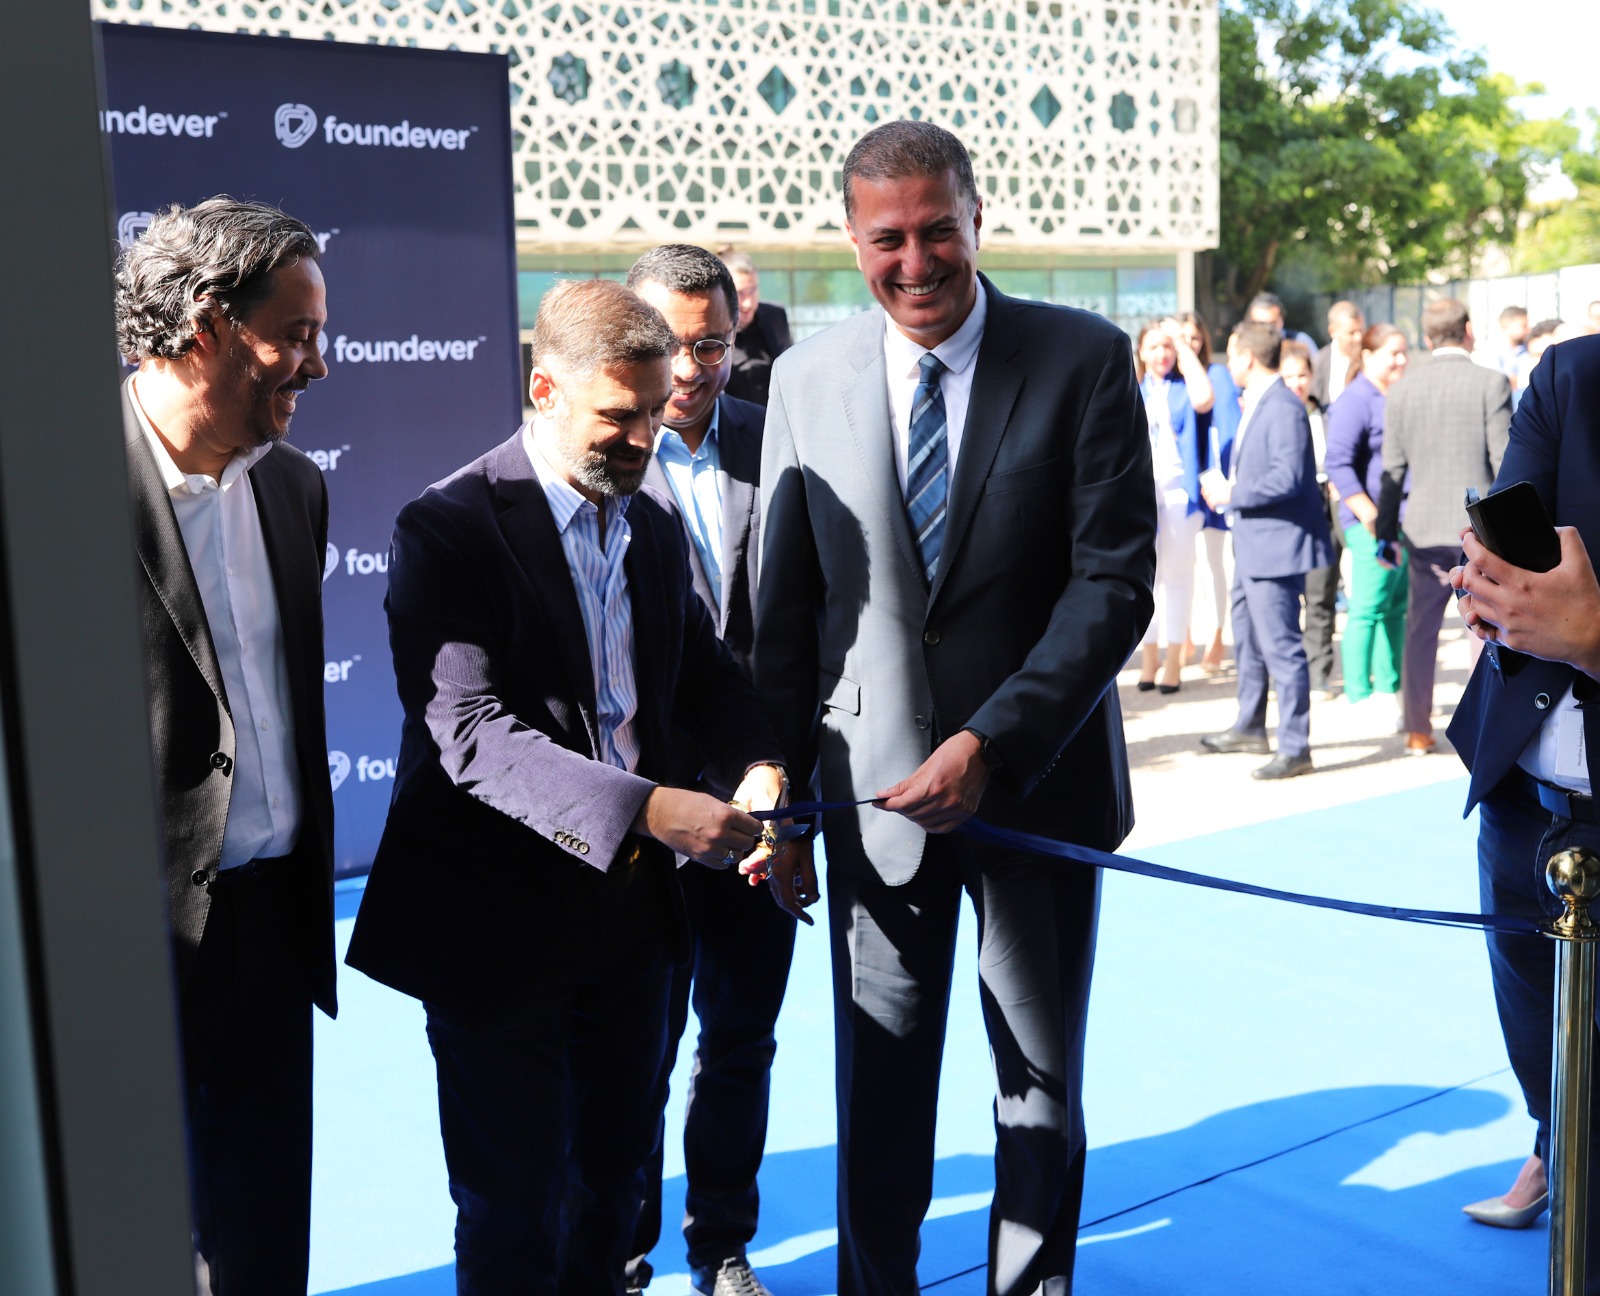 Foundever establishes itself in Rabat and generates almost 2,000 jobs